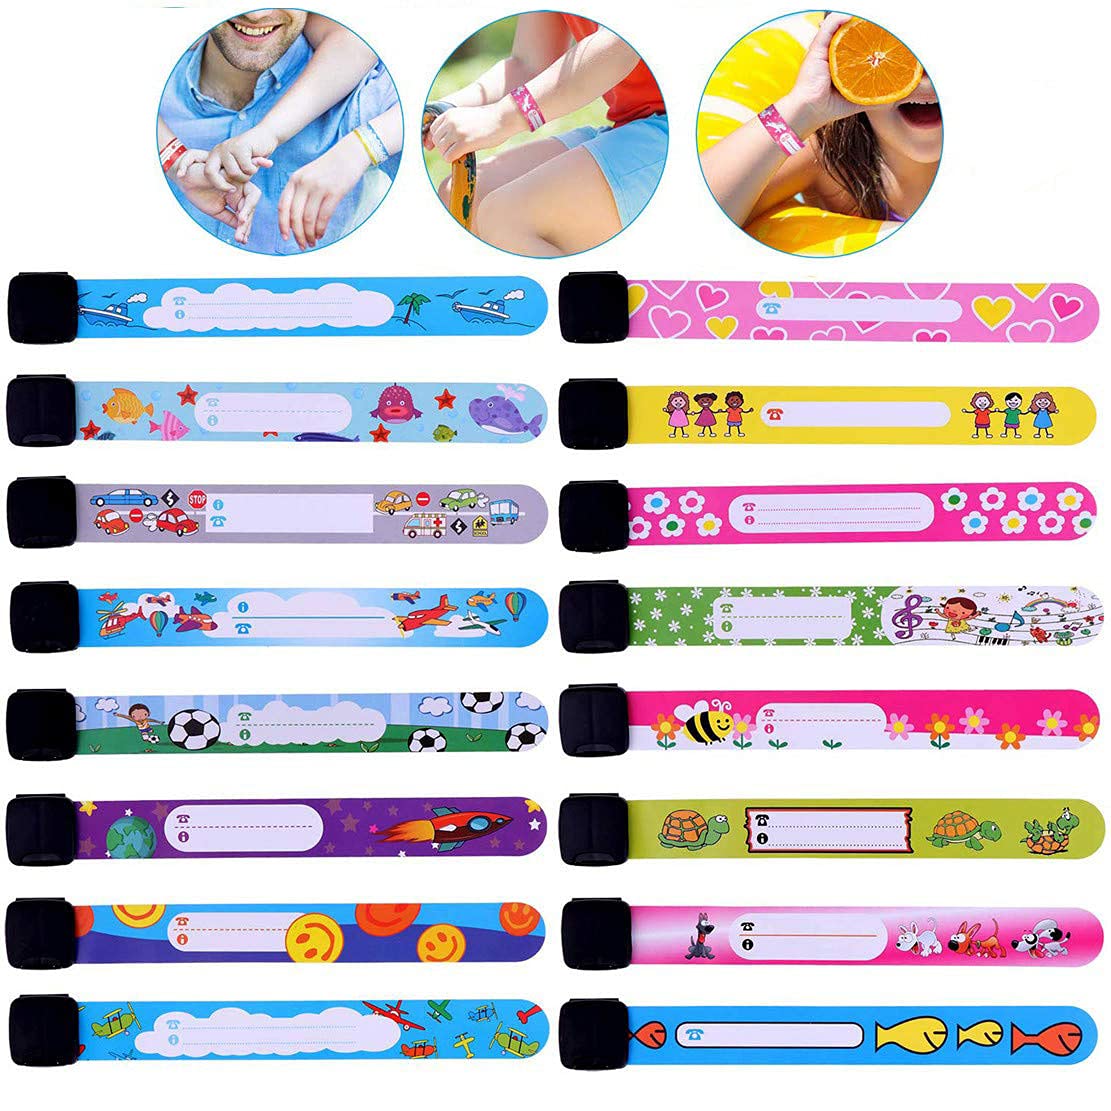 Safety ID Wristbands,16 PCS Anti Lost ID Wristband Children Safety ID Wristband Reusable Identification Bracelets Adjustable Waterproof ID Band SOS Emergency Bands for Boys and Girls